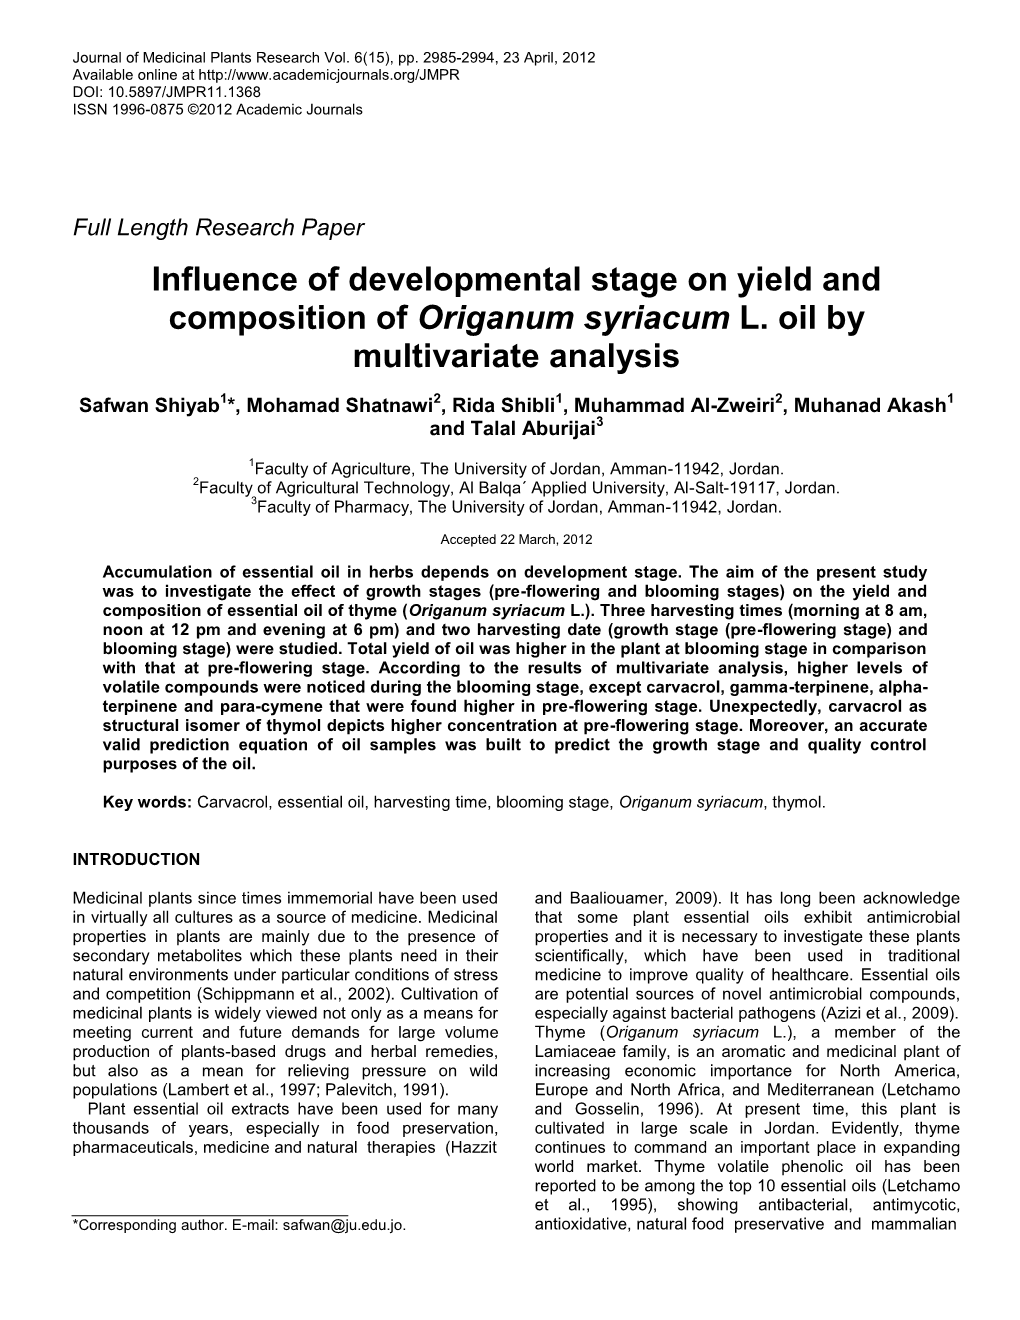 Influence of Developmental Stage on Yield and Composition of Origanum Syriacum L. Oil by Multivariate Analysis